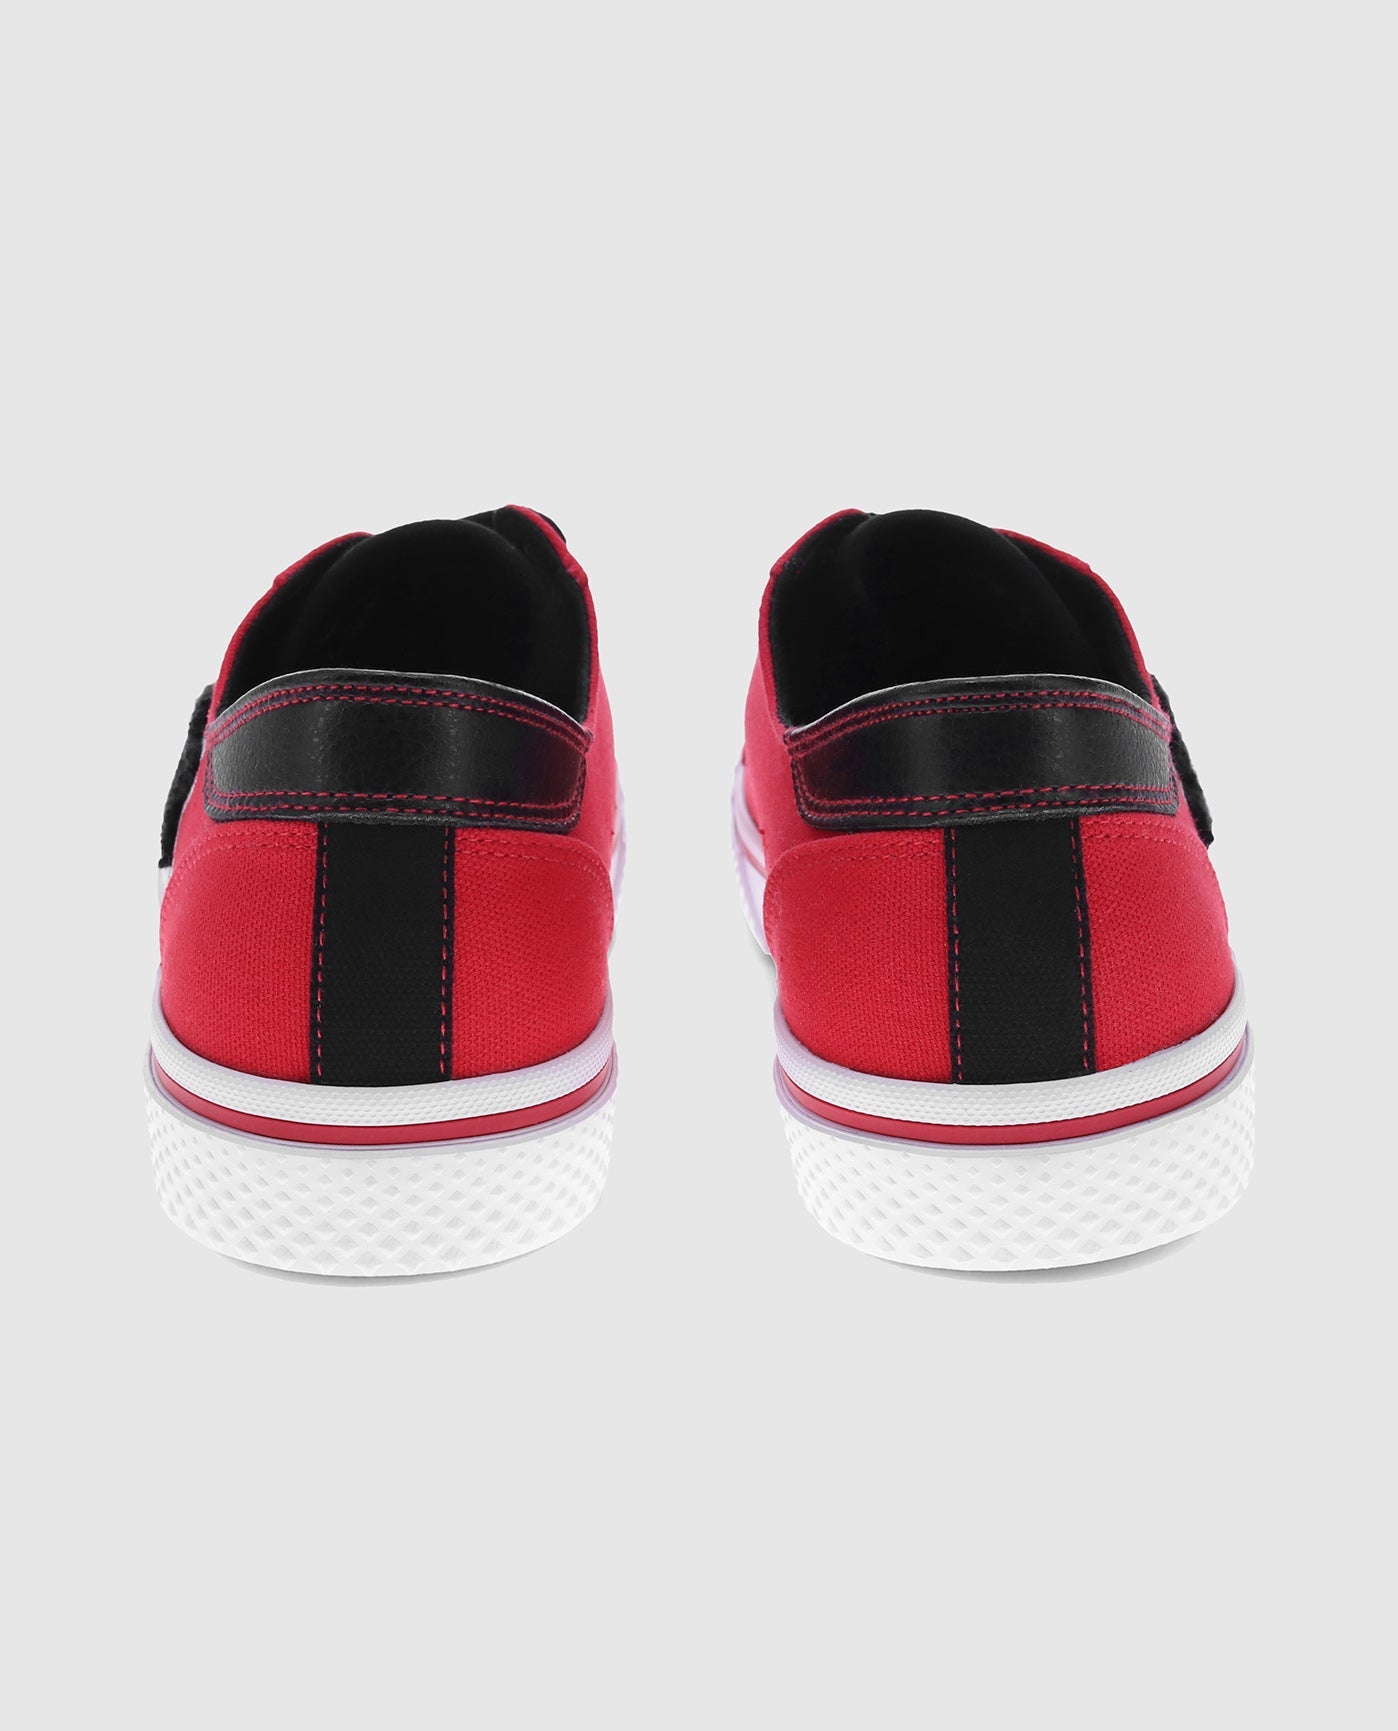 Back Of Starter Tradition 71 Low Red Sneaker Pair | Red